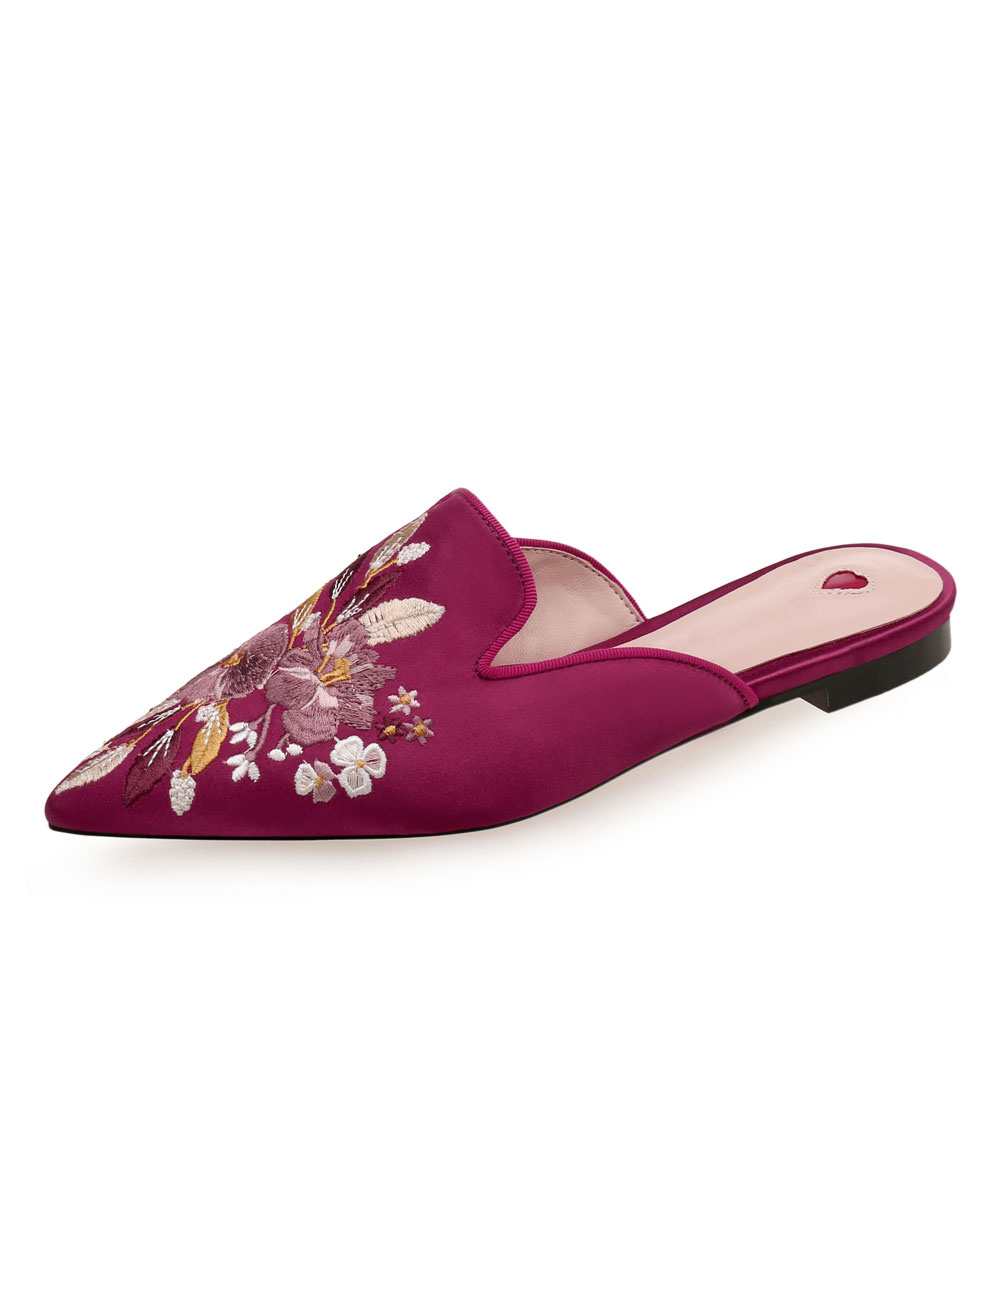 Pink Mules Shoes Satin Pointed Toe Floral Embroidered Backless Flat ...